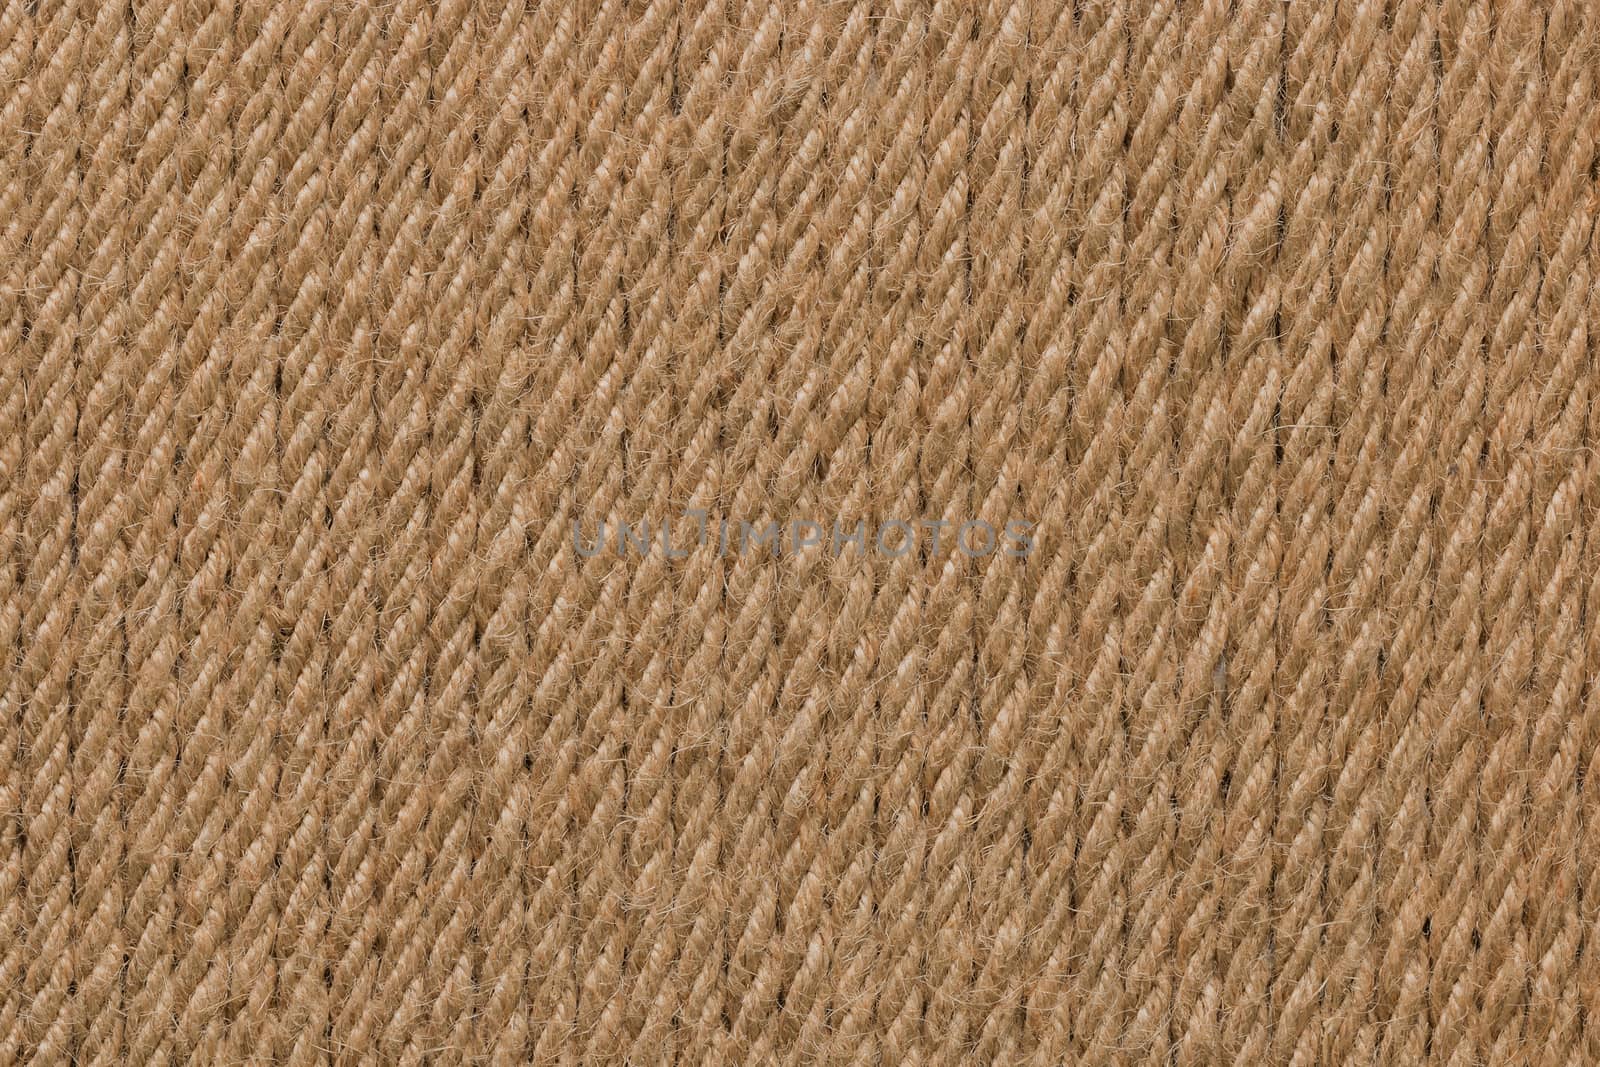 Natural Rope texture, rope background lines. Vertical strands of rope as background